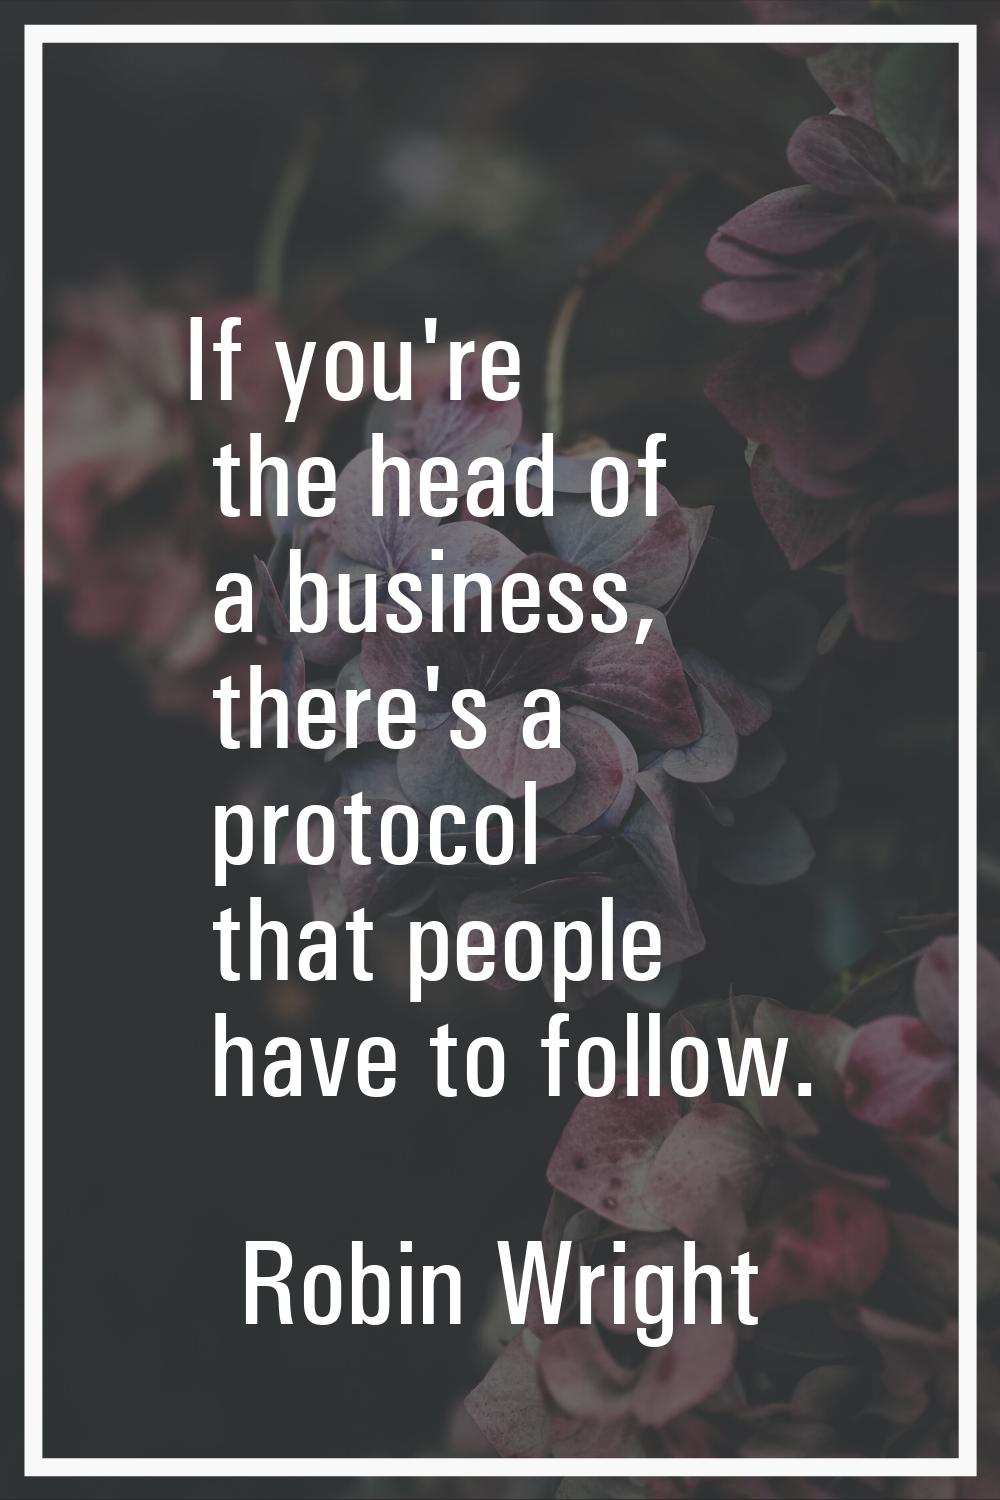 If you're the head of a business, there's a protocol that people have to follow.